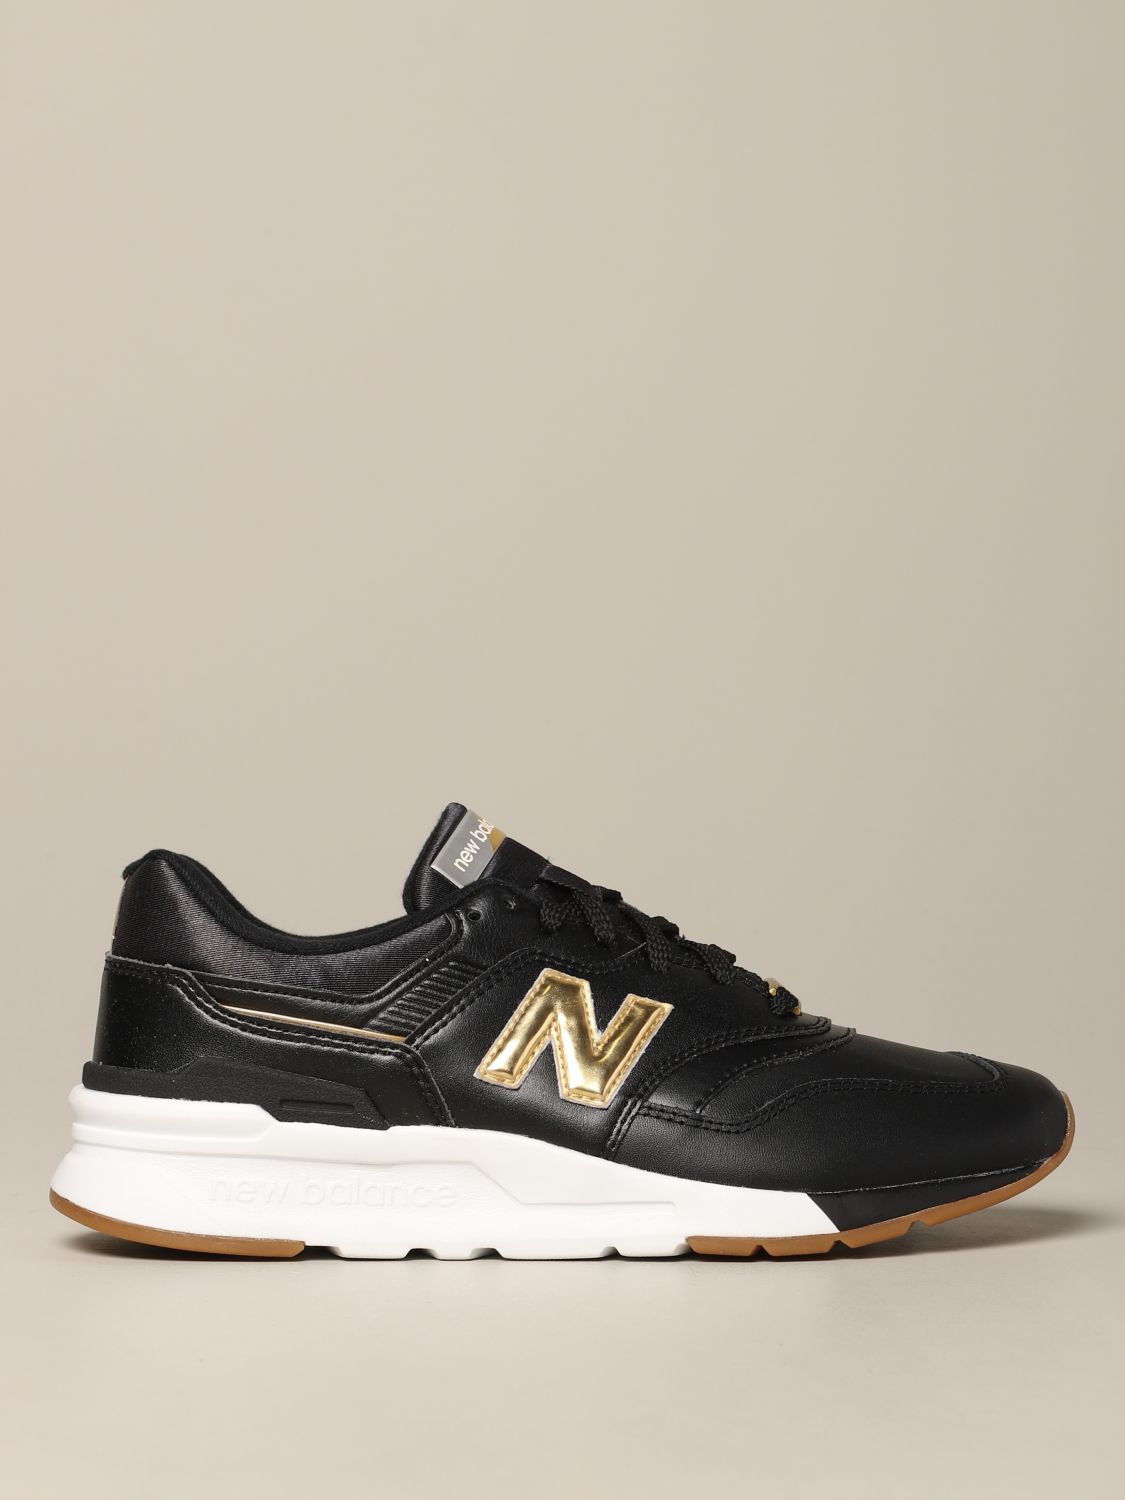 New Balance Made In USA Horween Leather Pack - Sneaker Freaker